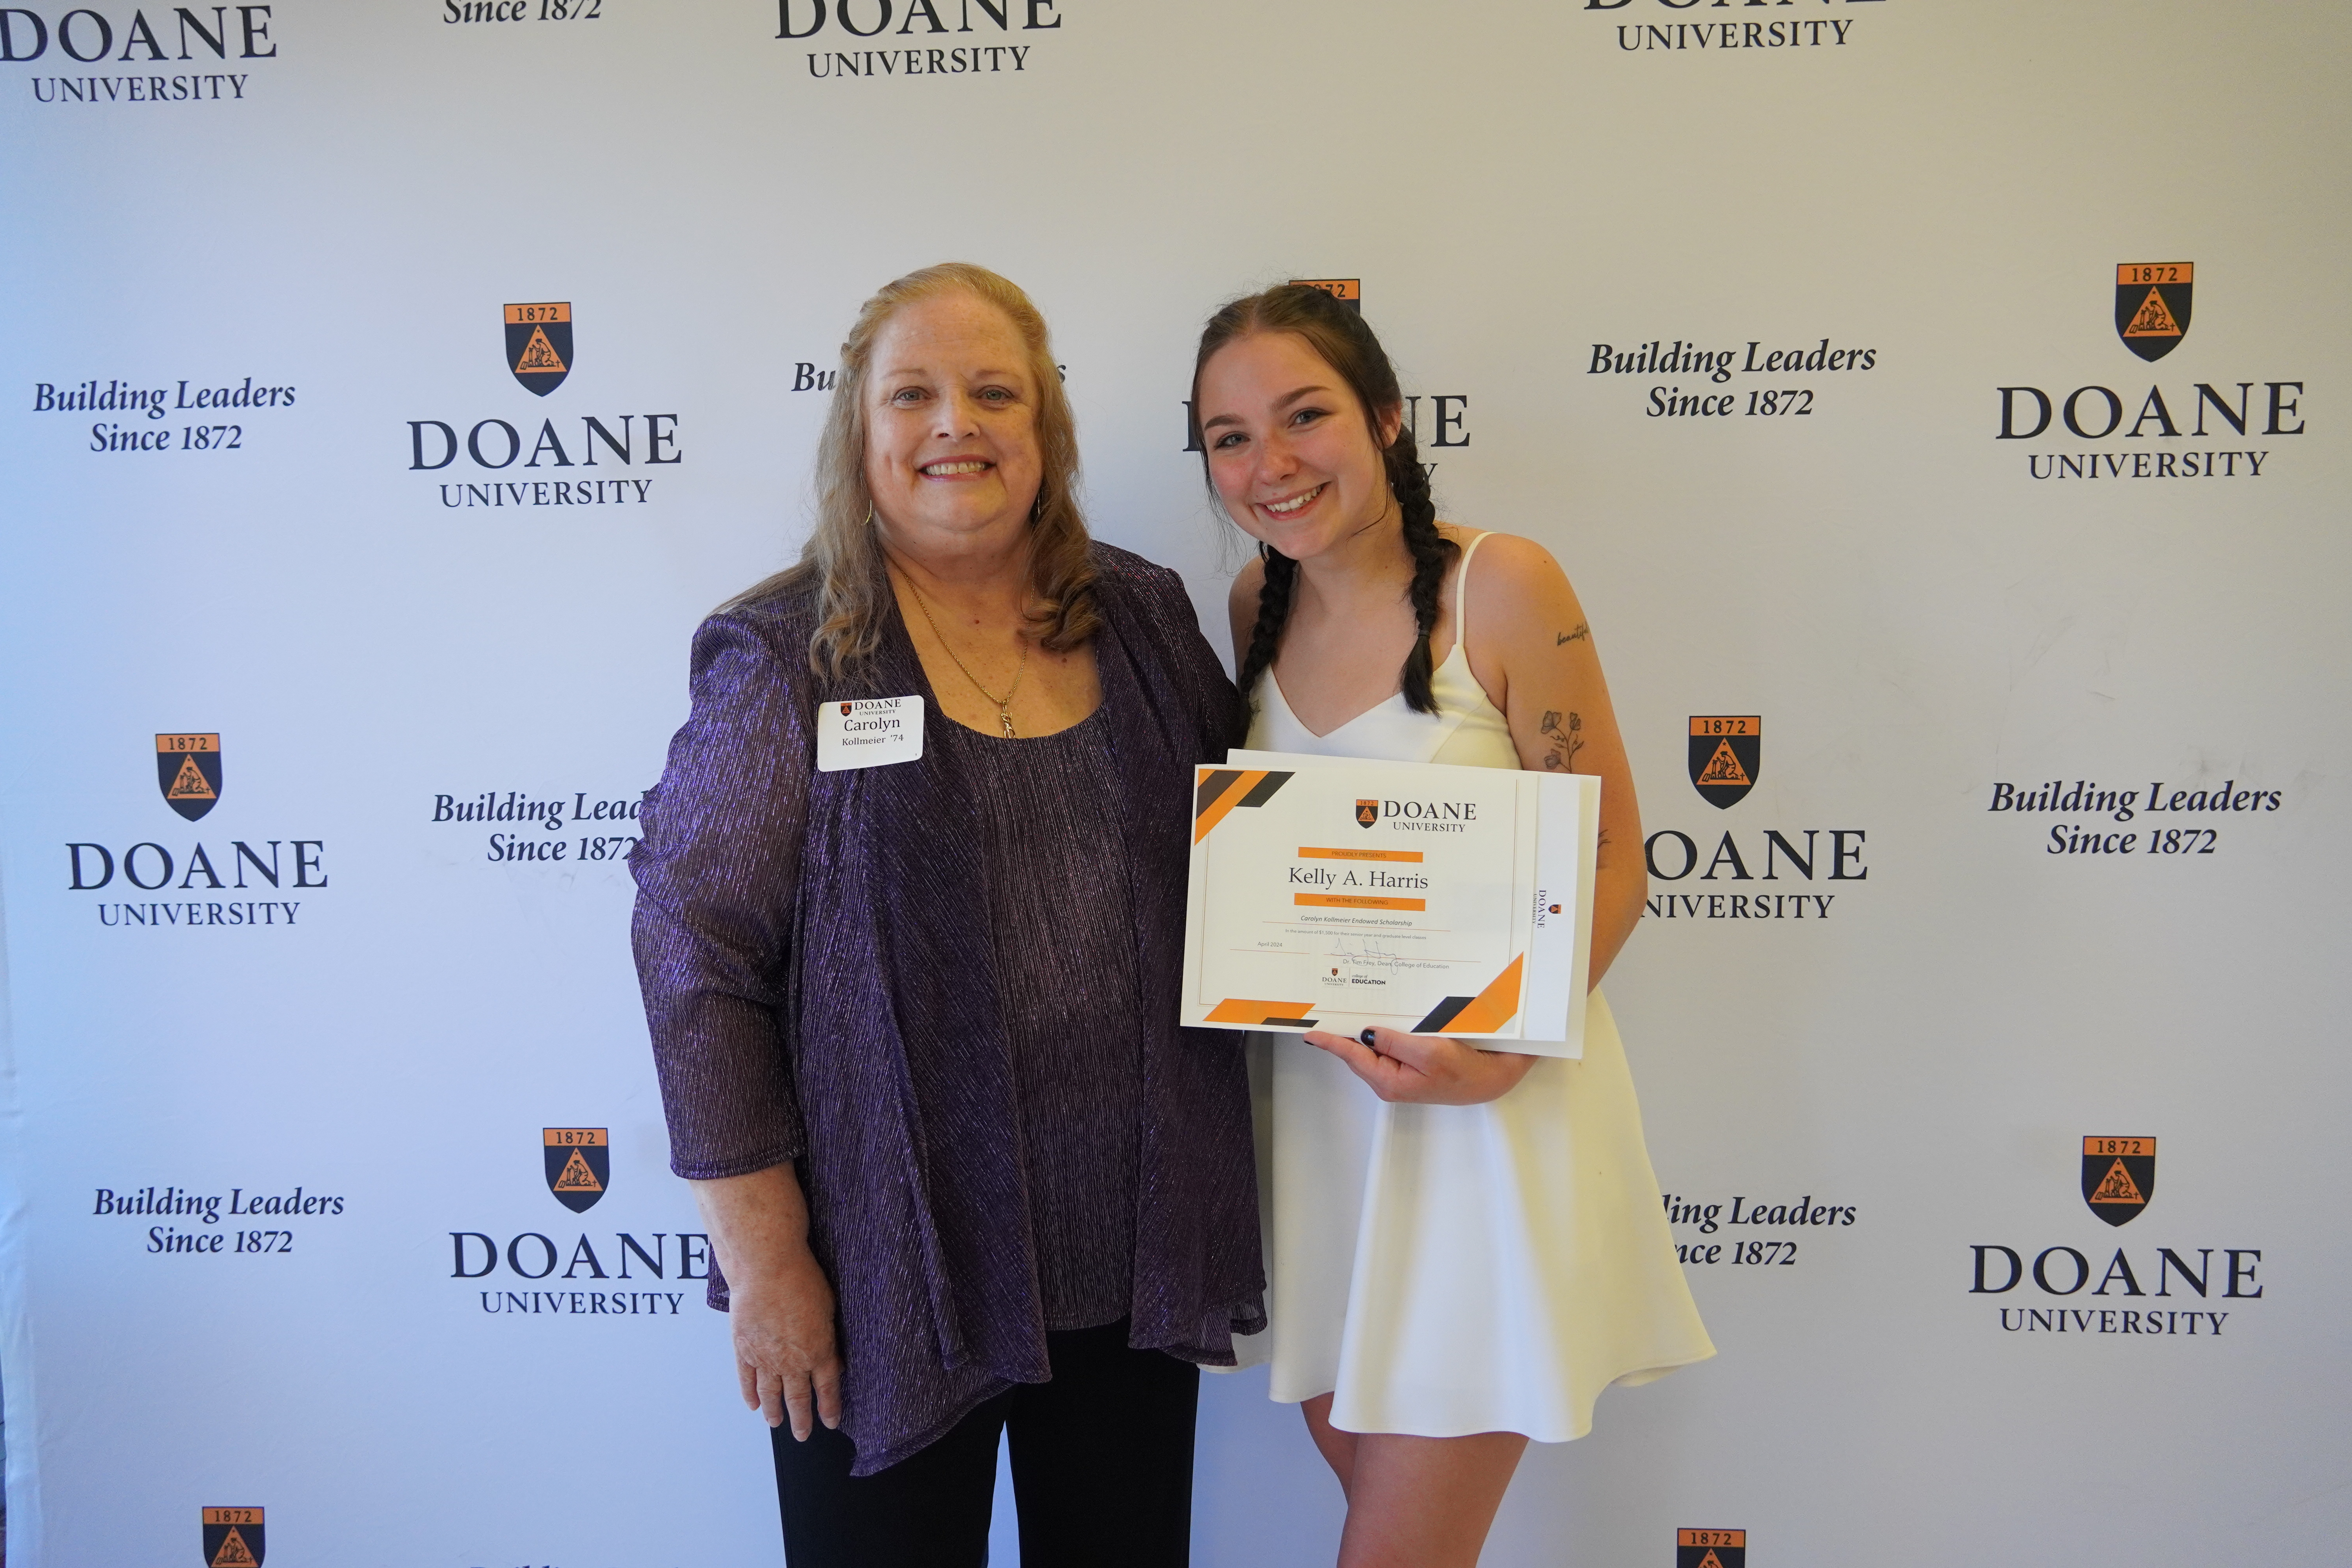 Two women, one in a purple shirt and jacket, and one in a short white dress, stand in front of a white background with text that reads "Doane University, Building Leaders Since 1872." 